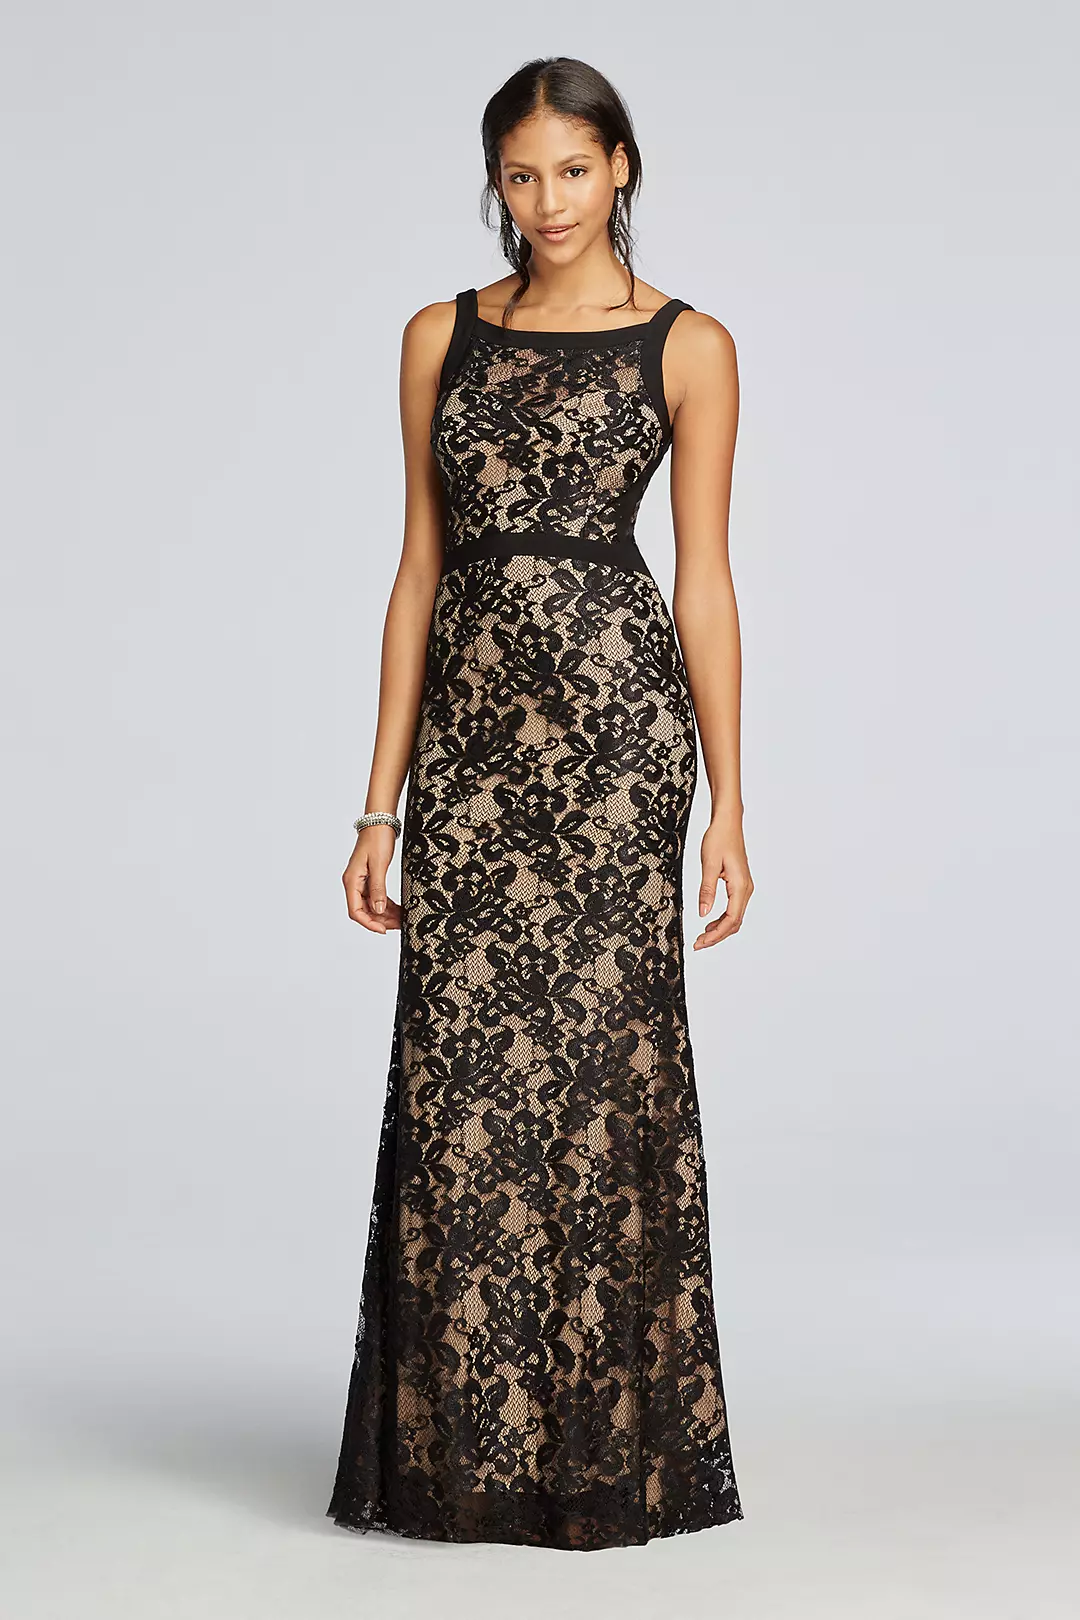 Long Sleeveless All Over Illusion Lace Dress   Image